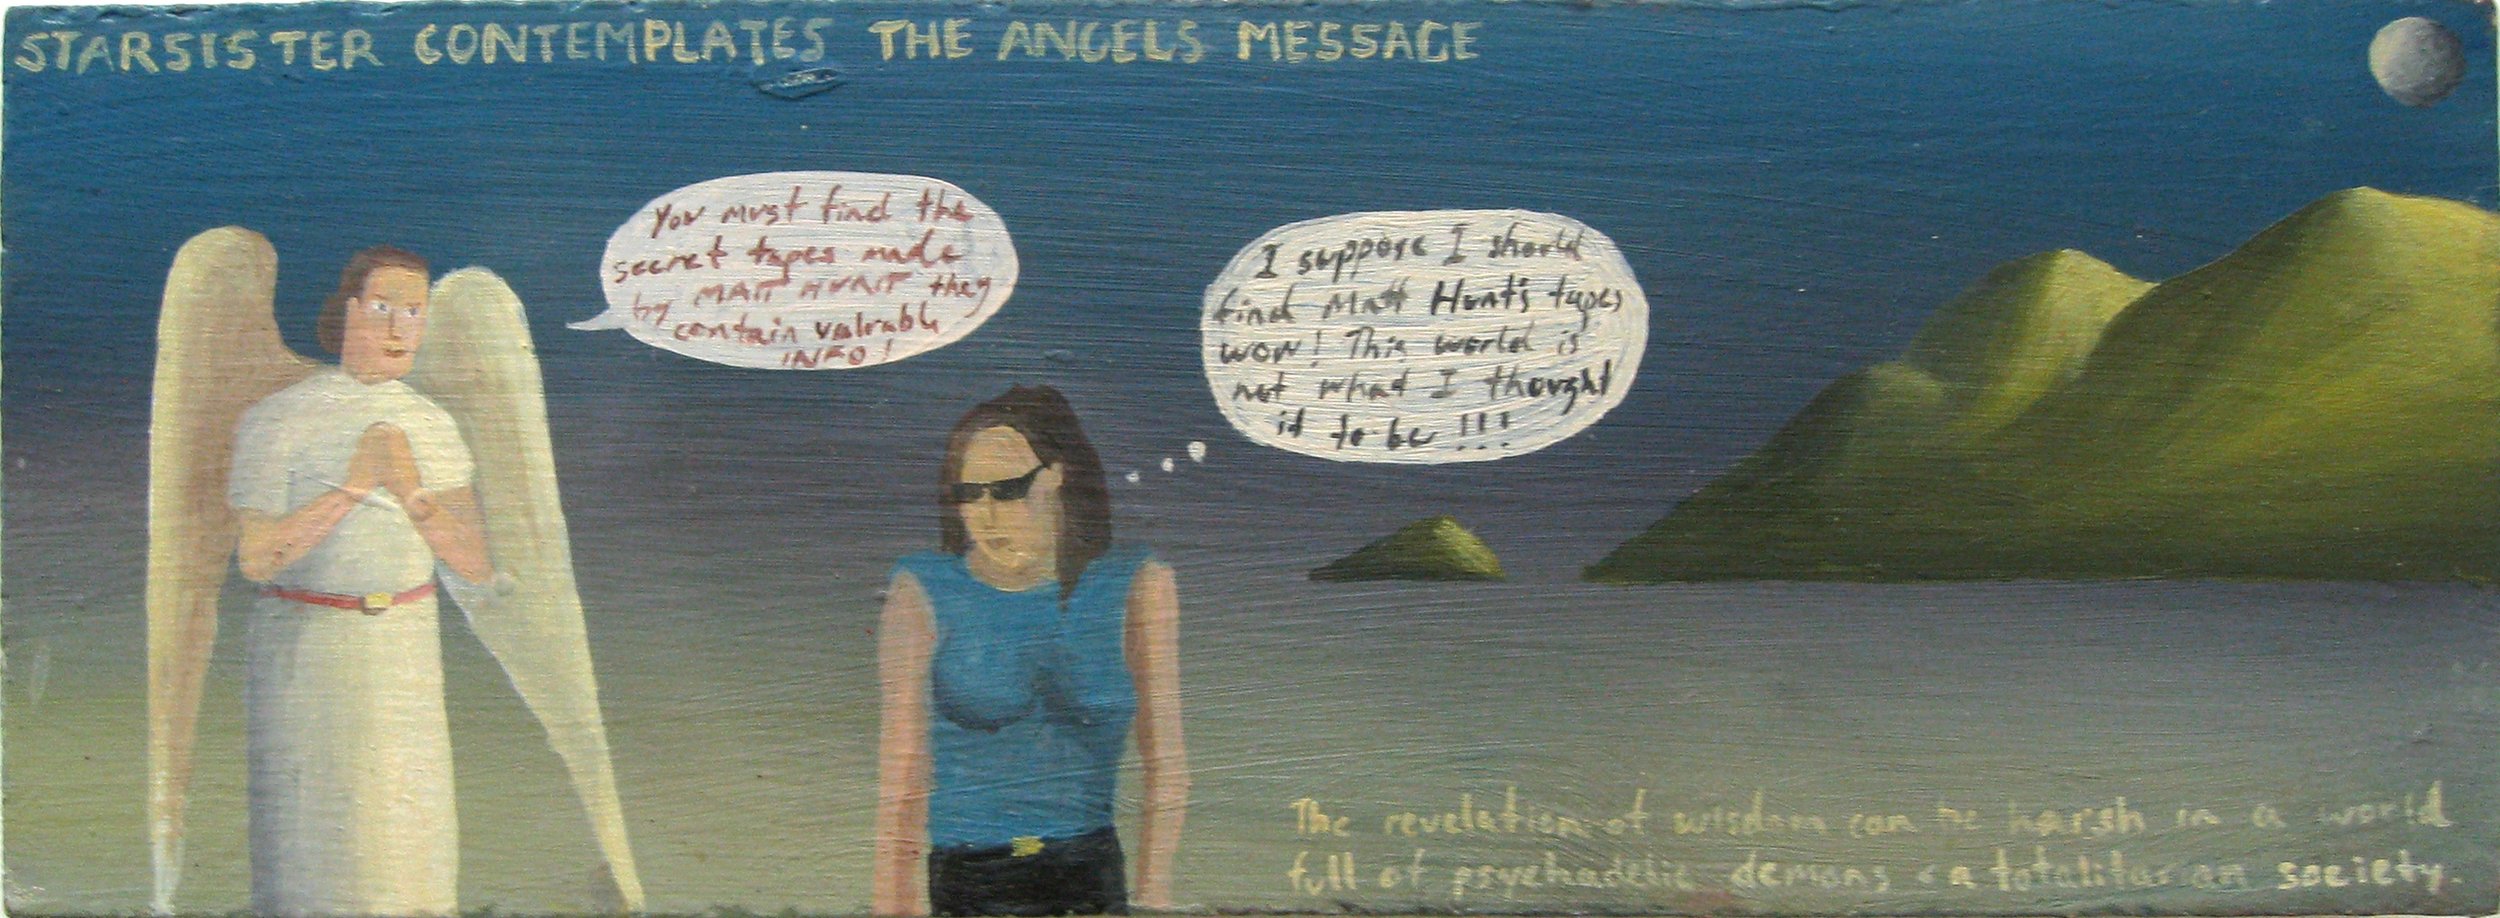 STARSISTER CONTEMPLATES THE ANGELS MESSAGE